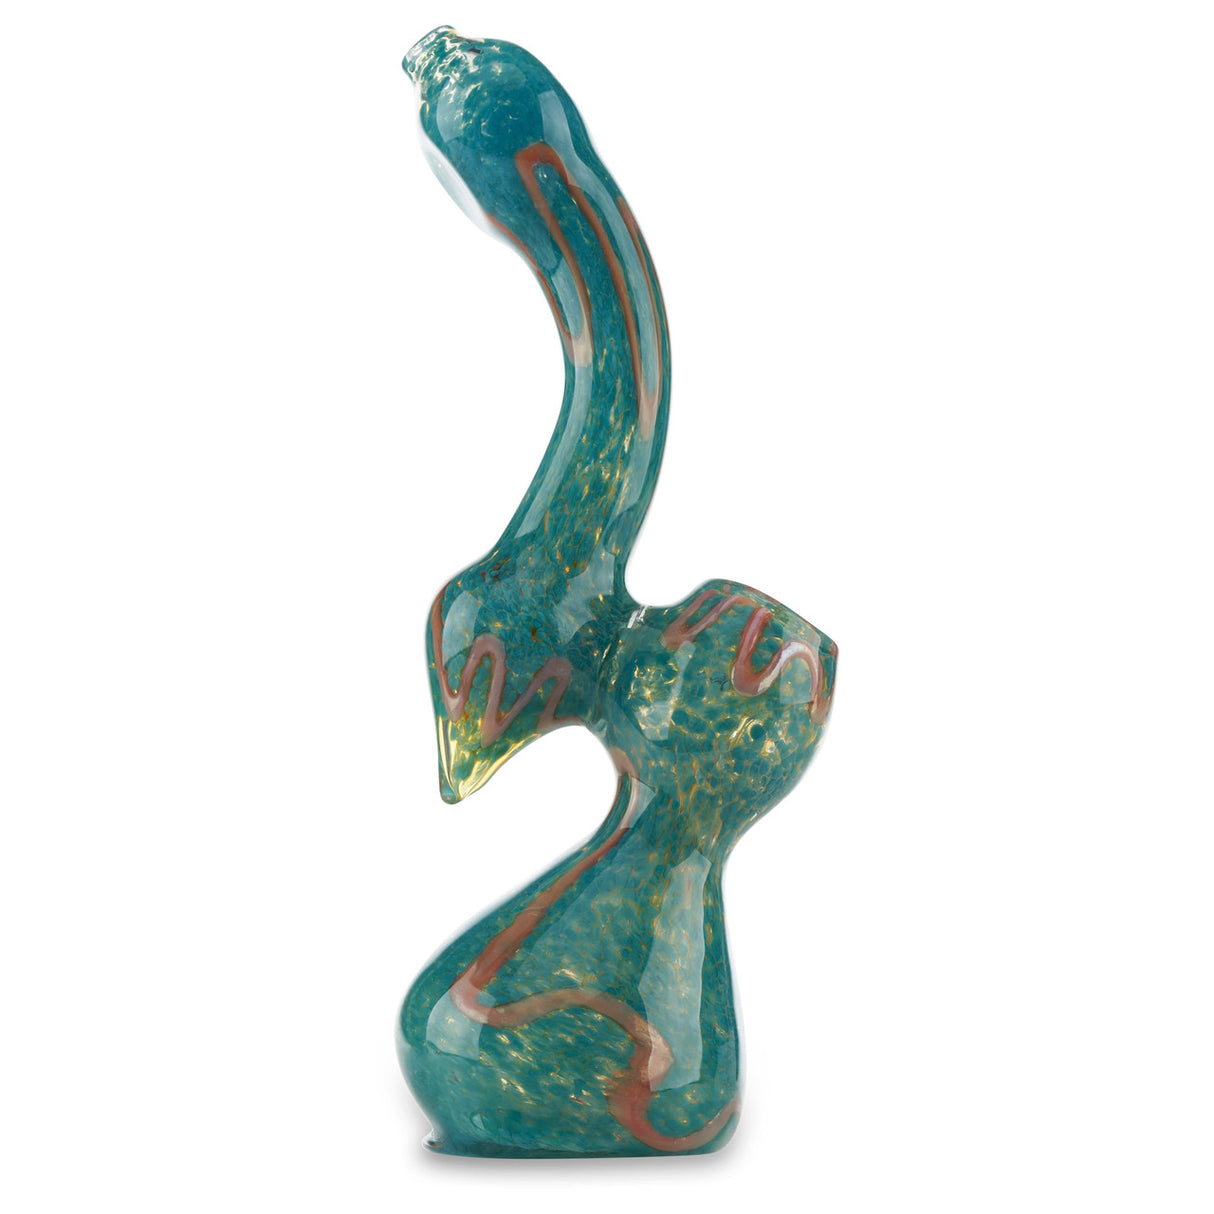 8 inch bubbler with turquoise and orange line design